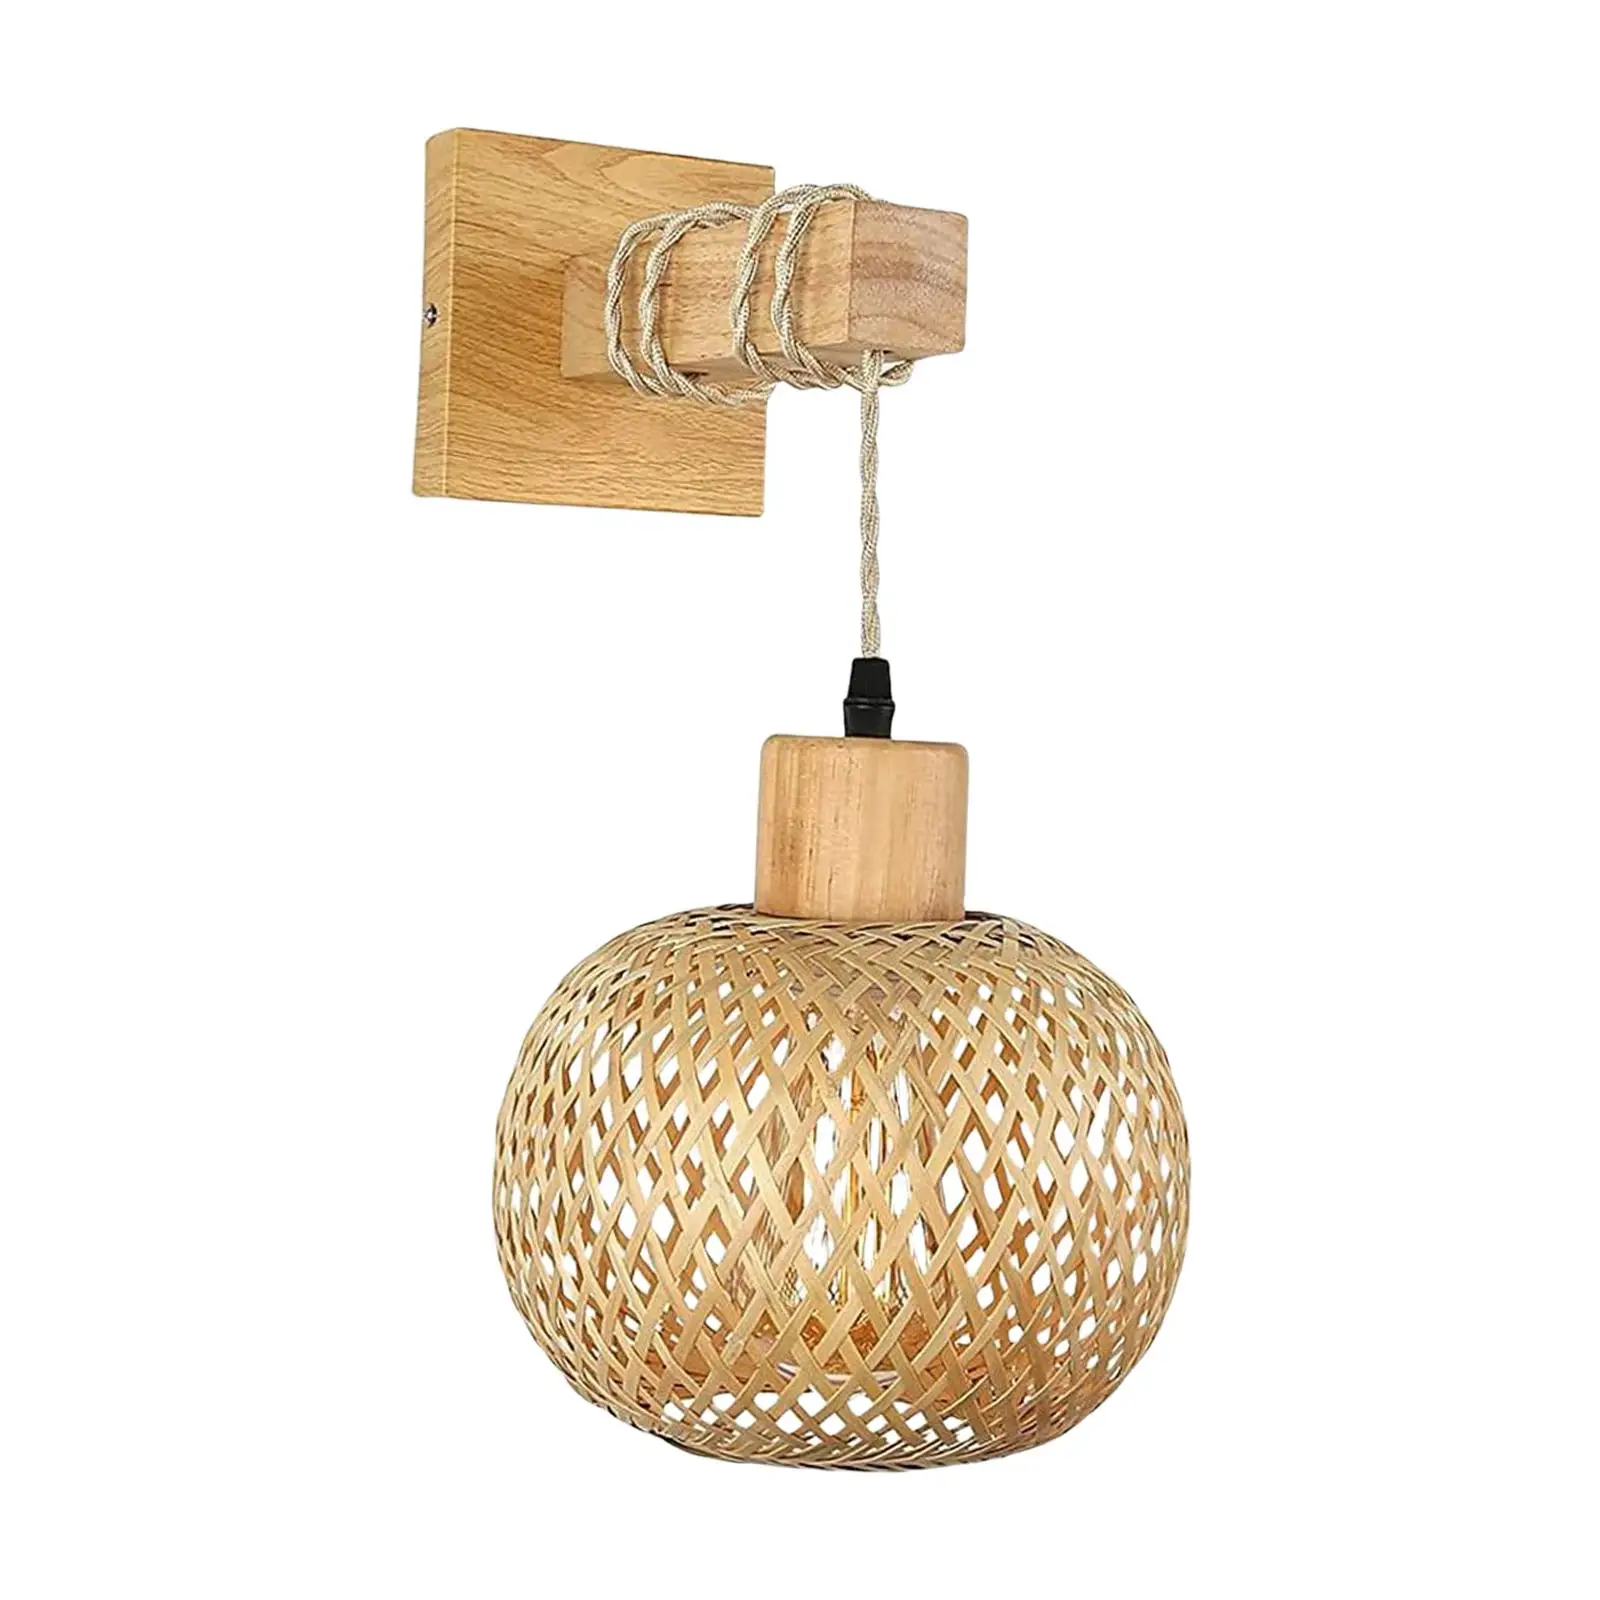 Rattan Wall Sconce Wall Mounted Light Fixture Bamboo Hand Woven for Indoor